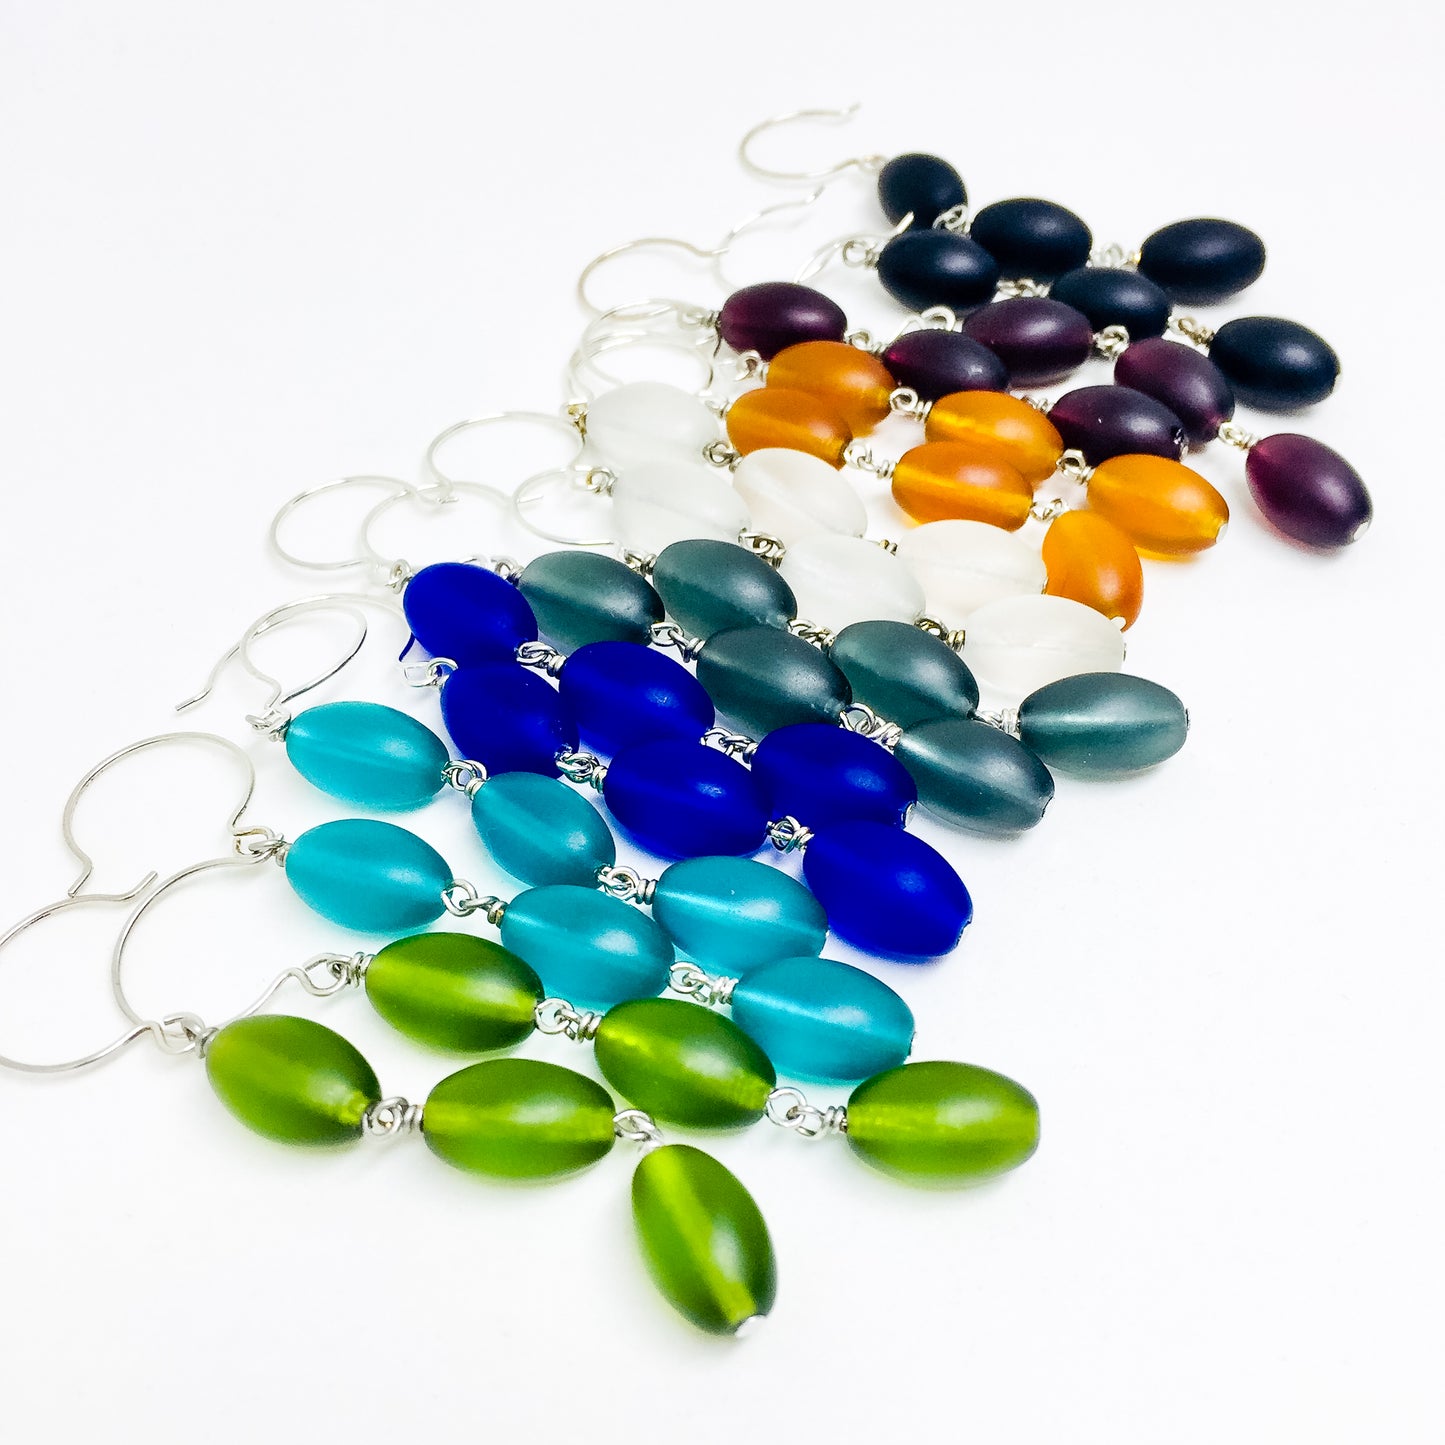 Frosted Czech glass bead drop earrings in all colors